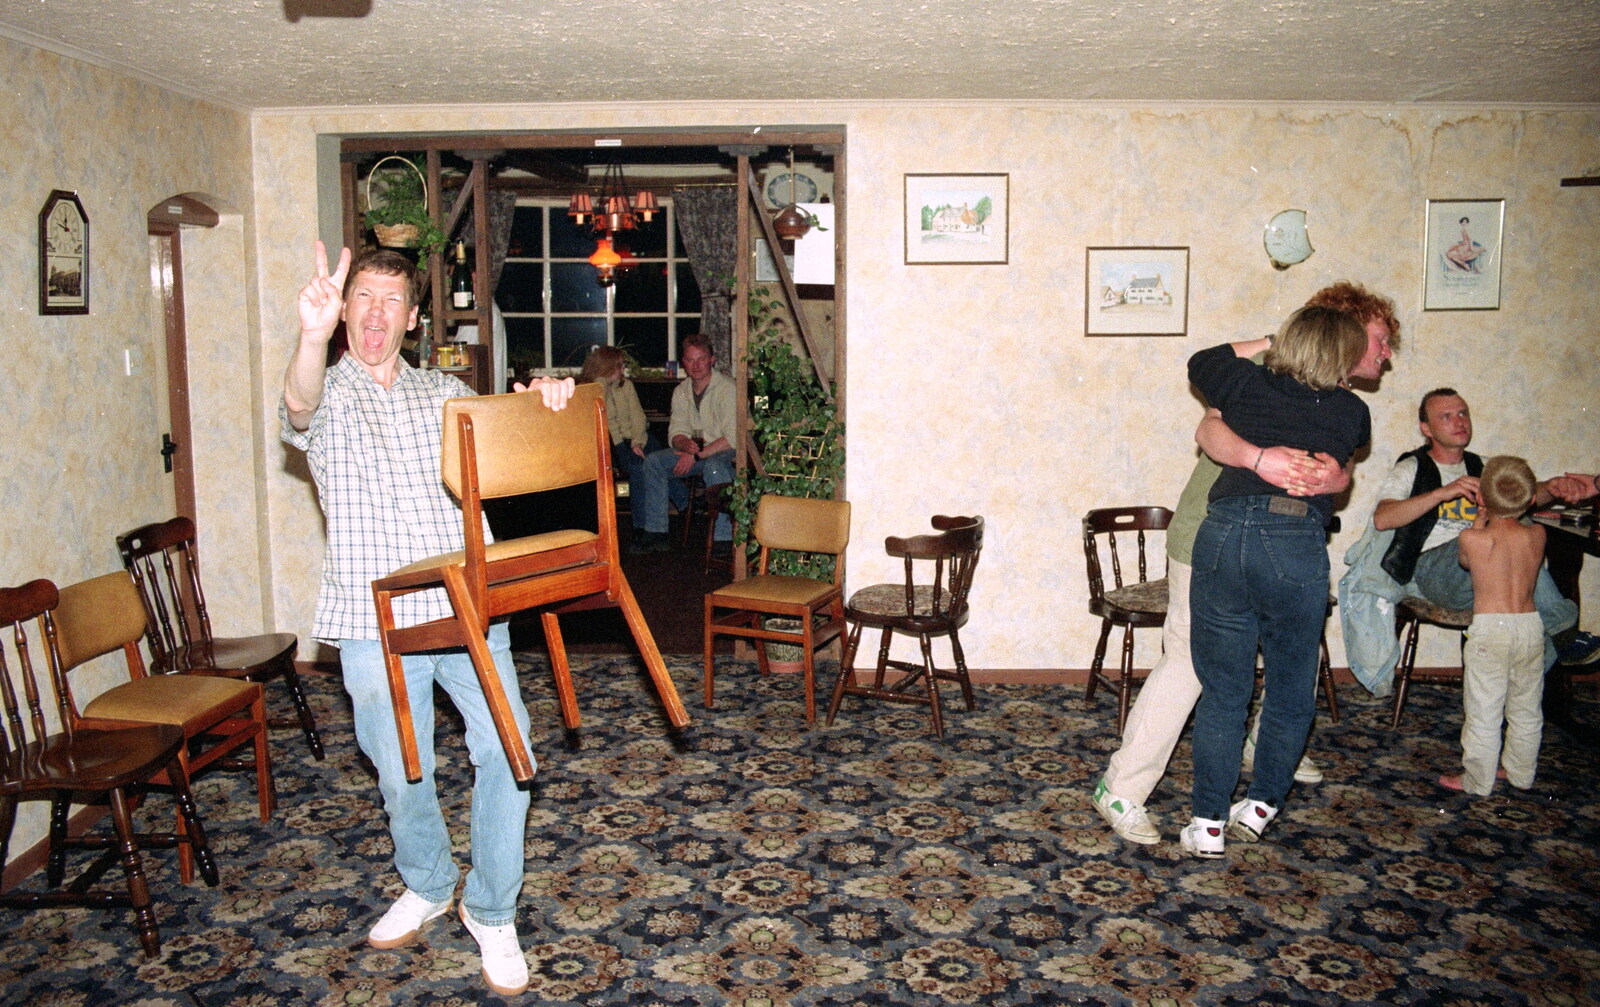 Apple and his legendary 'chair dance' moment from Wavy's Thirtieth Birthday, The Swan Inn, Brome, Suffolk - 24th May 2000